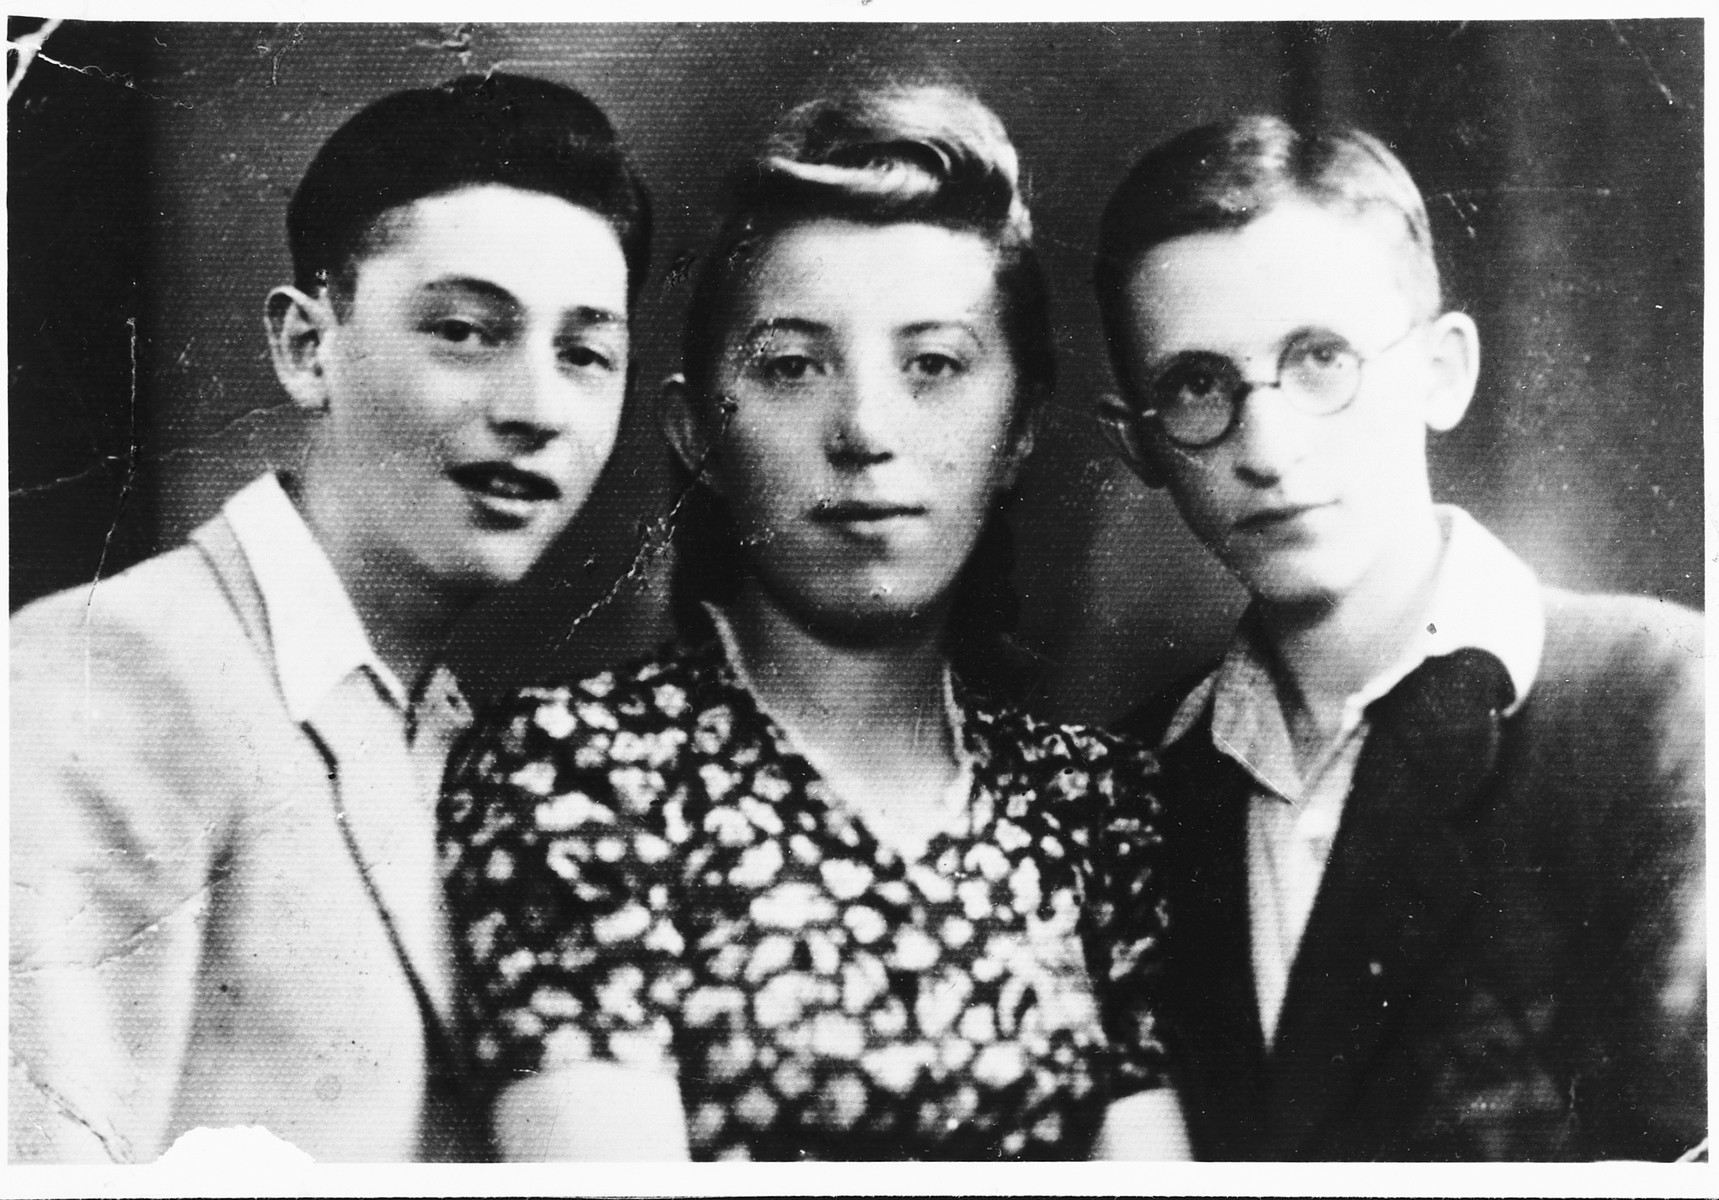 Portrait of three young people in the Bedzin ghetto, one of whom is wearing a Jewish star.

Pictured from left to right are Natan Gipsman, Regina Fajerman, and Efroim Poremba.